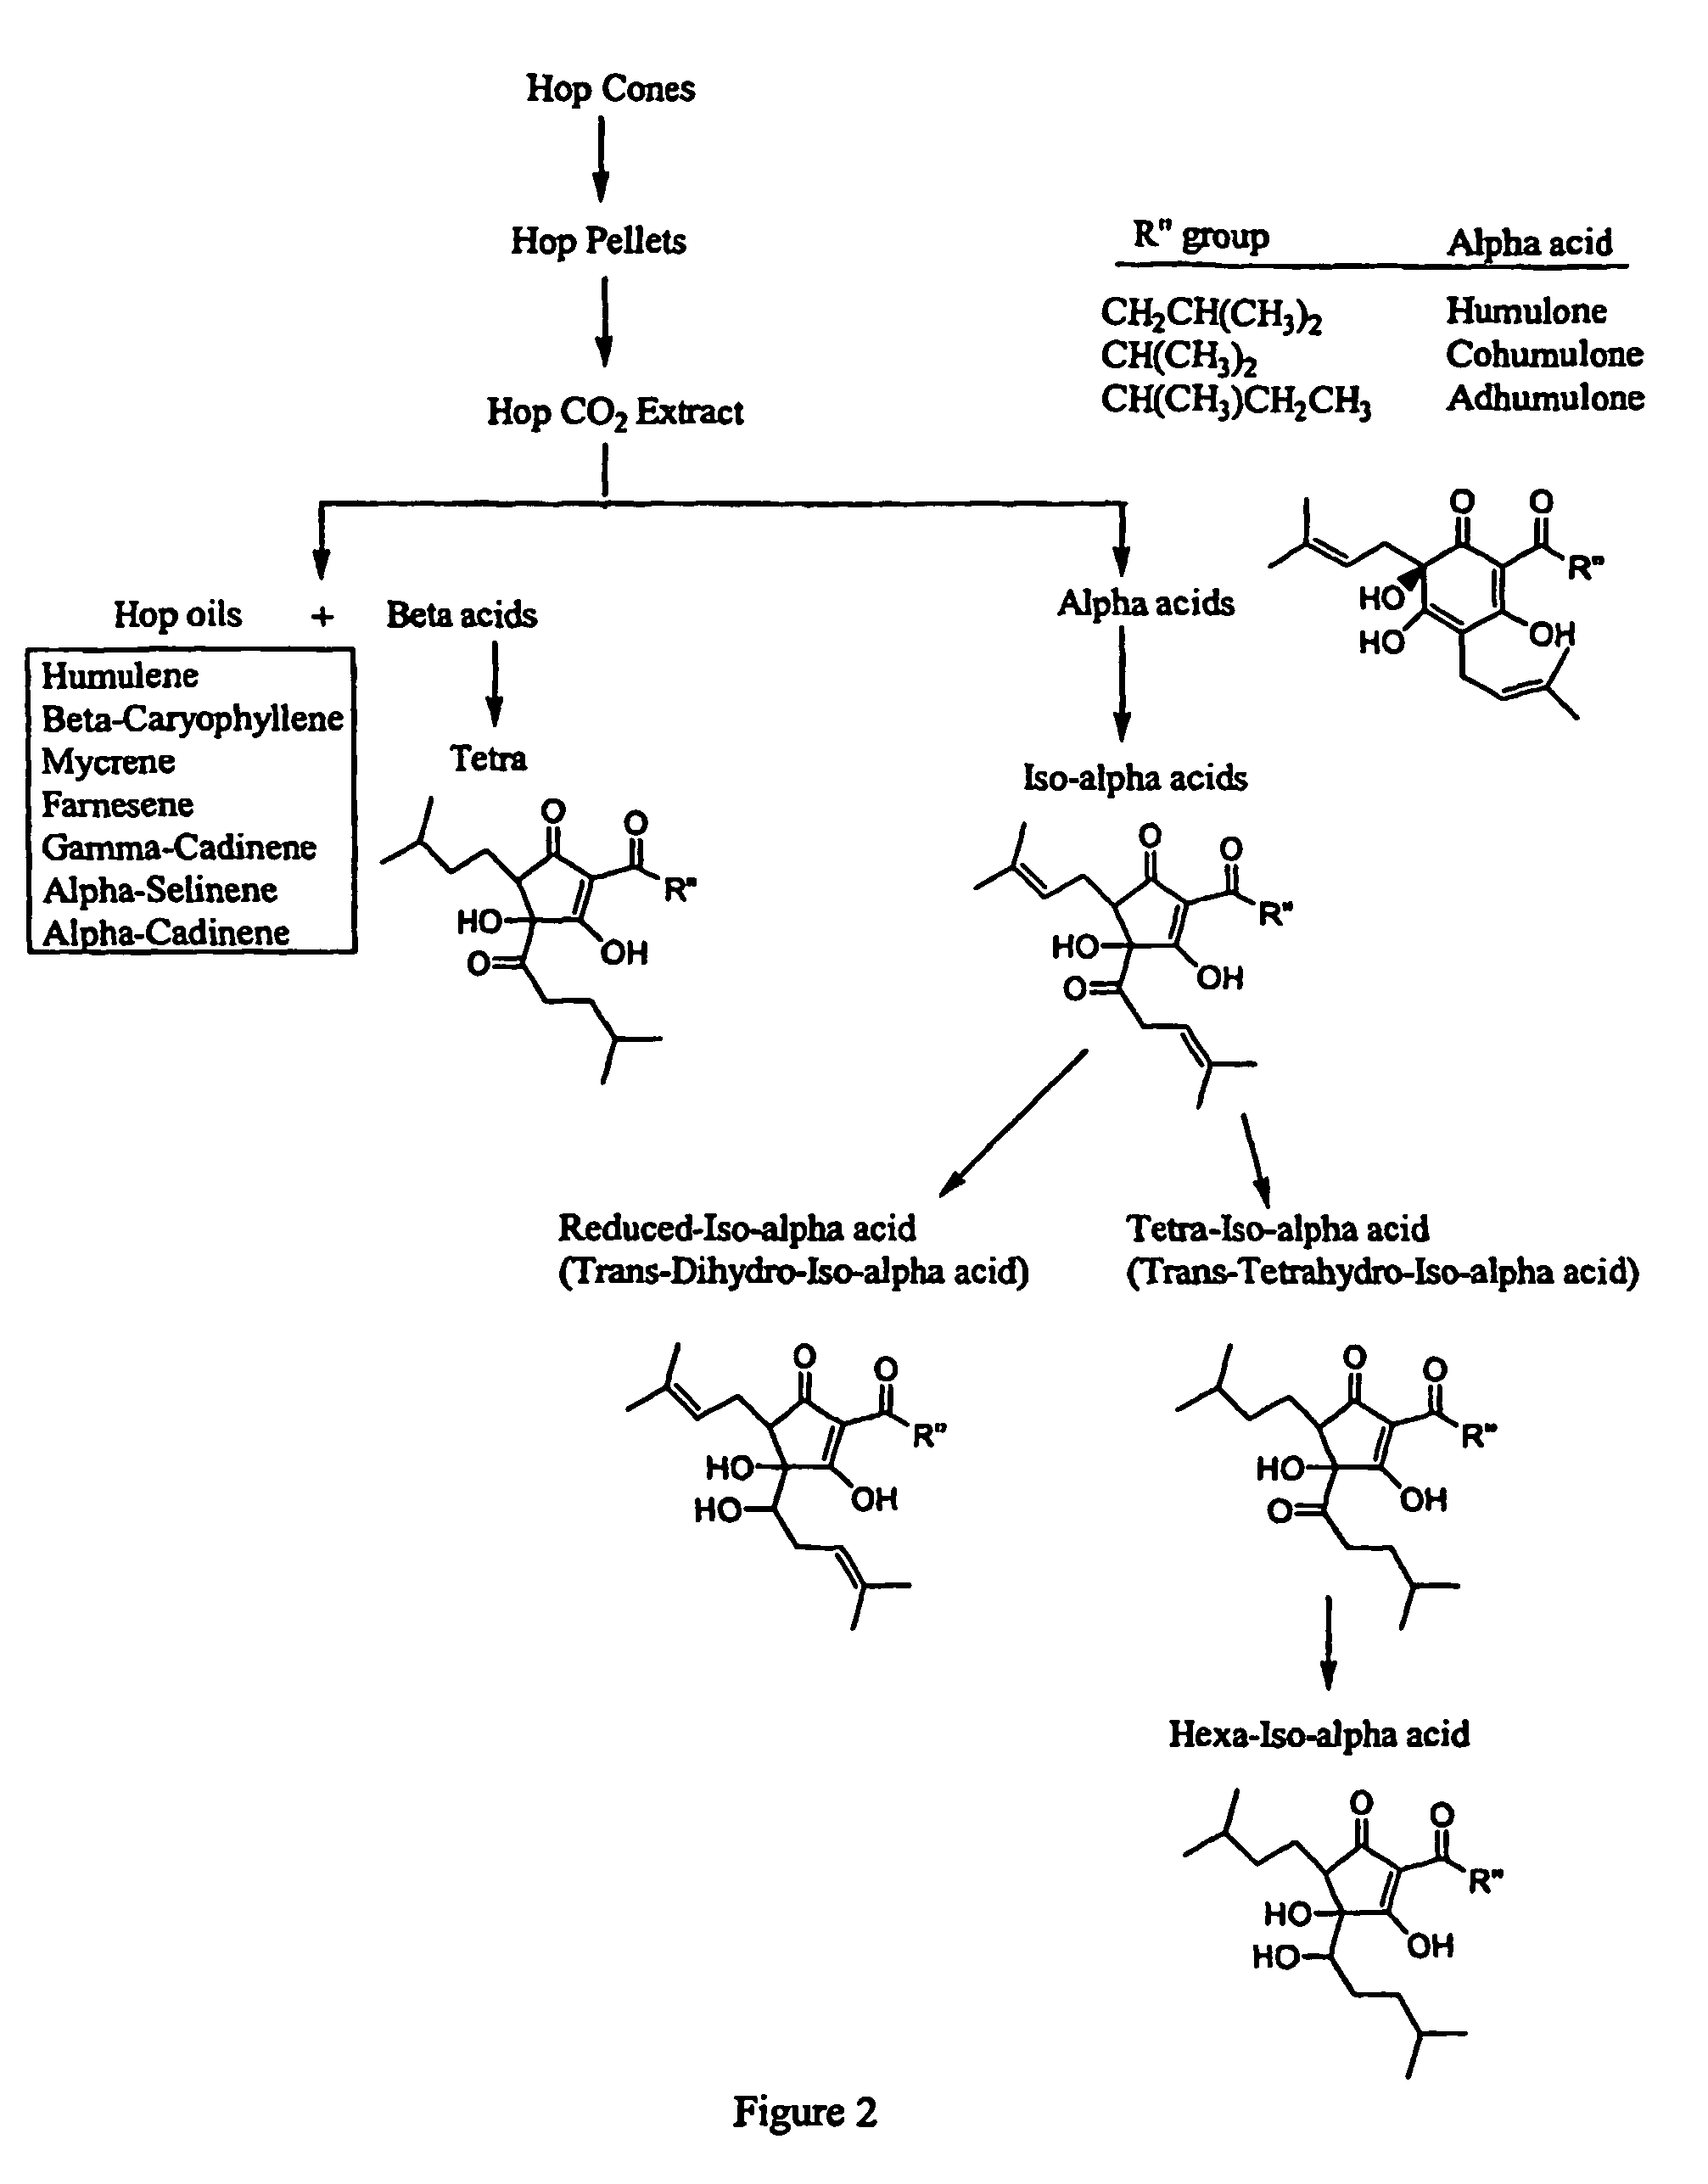 Anti-inflammatory pharmaceutical compositions for reducing inflammation and the treatment or prevention of gastric toxicity